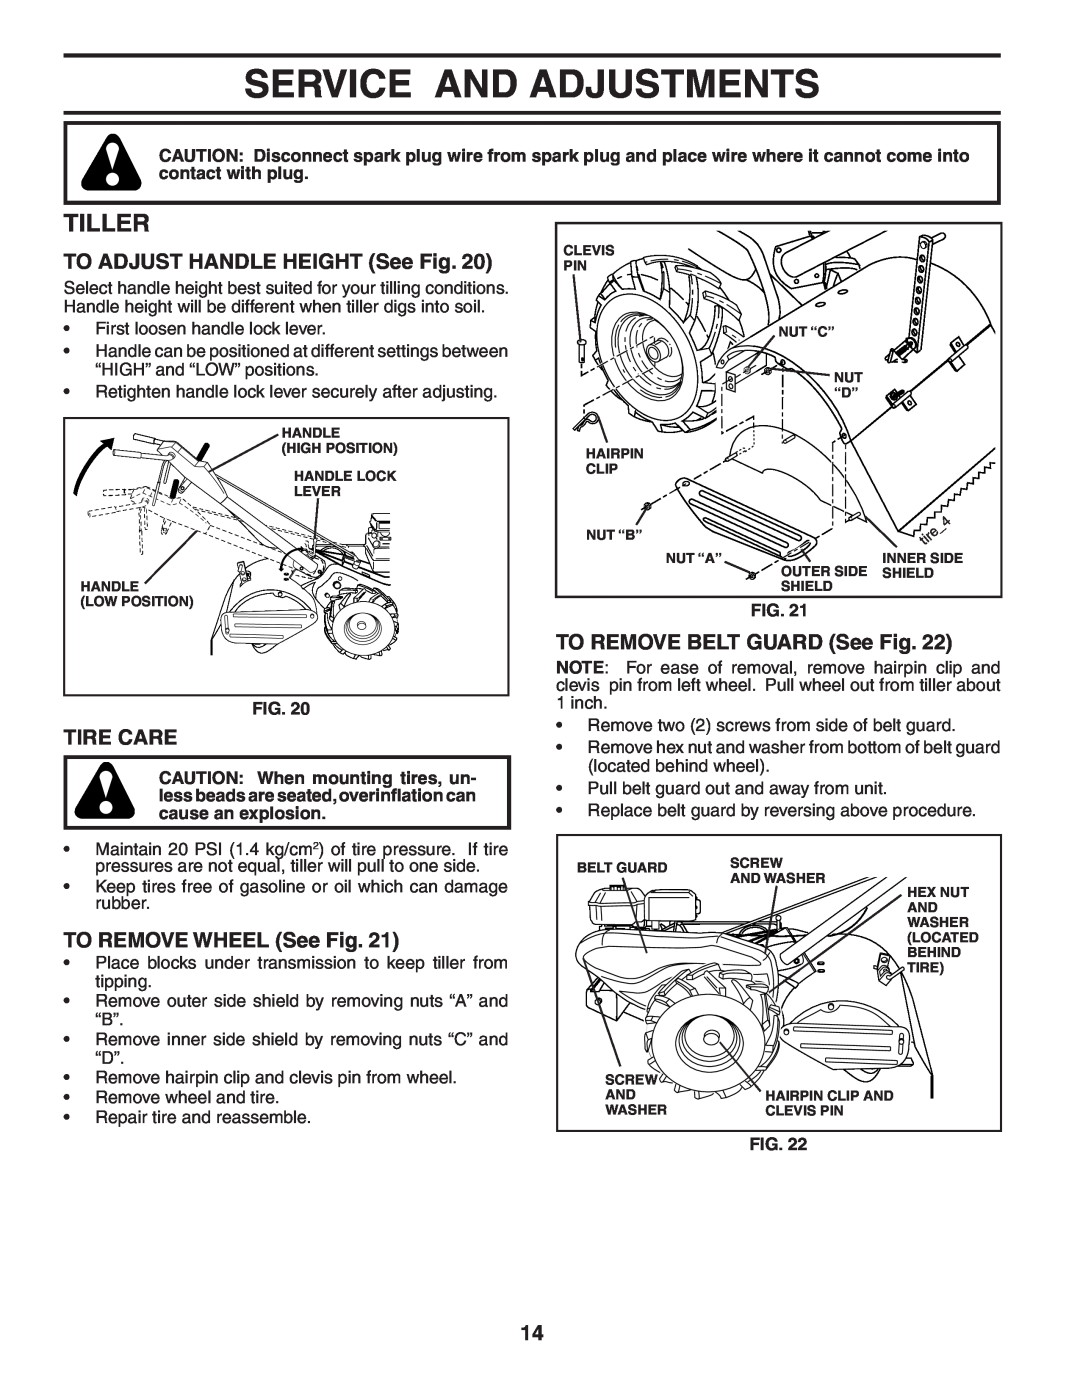 Poulan PRRT50 manual Service And Adjustments, Tiller, TO ADJUST HANDLE HEIGHT See Fig, Tire Care, TO REMOVE WHEEL See Fig 